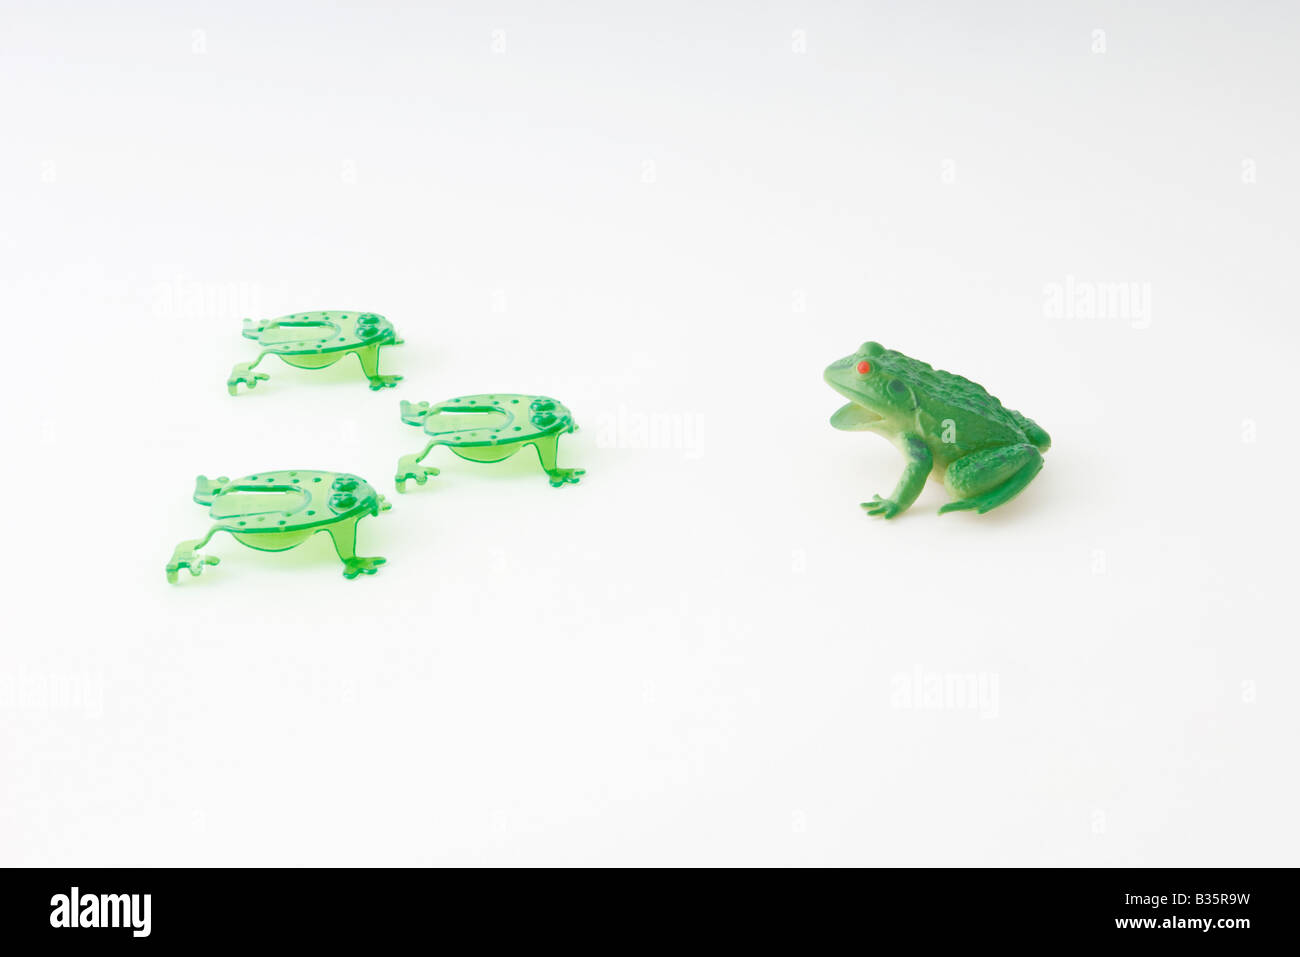 Plastic frog facing group of frog shaped game pieces Stock Photo